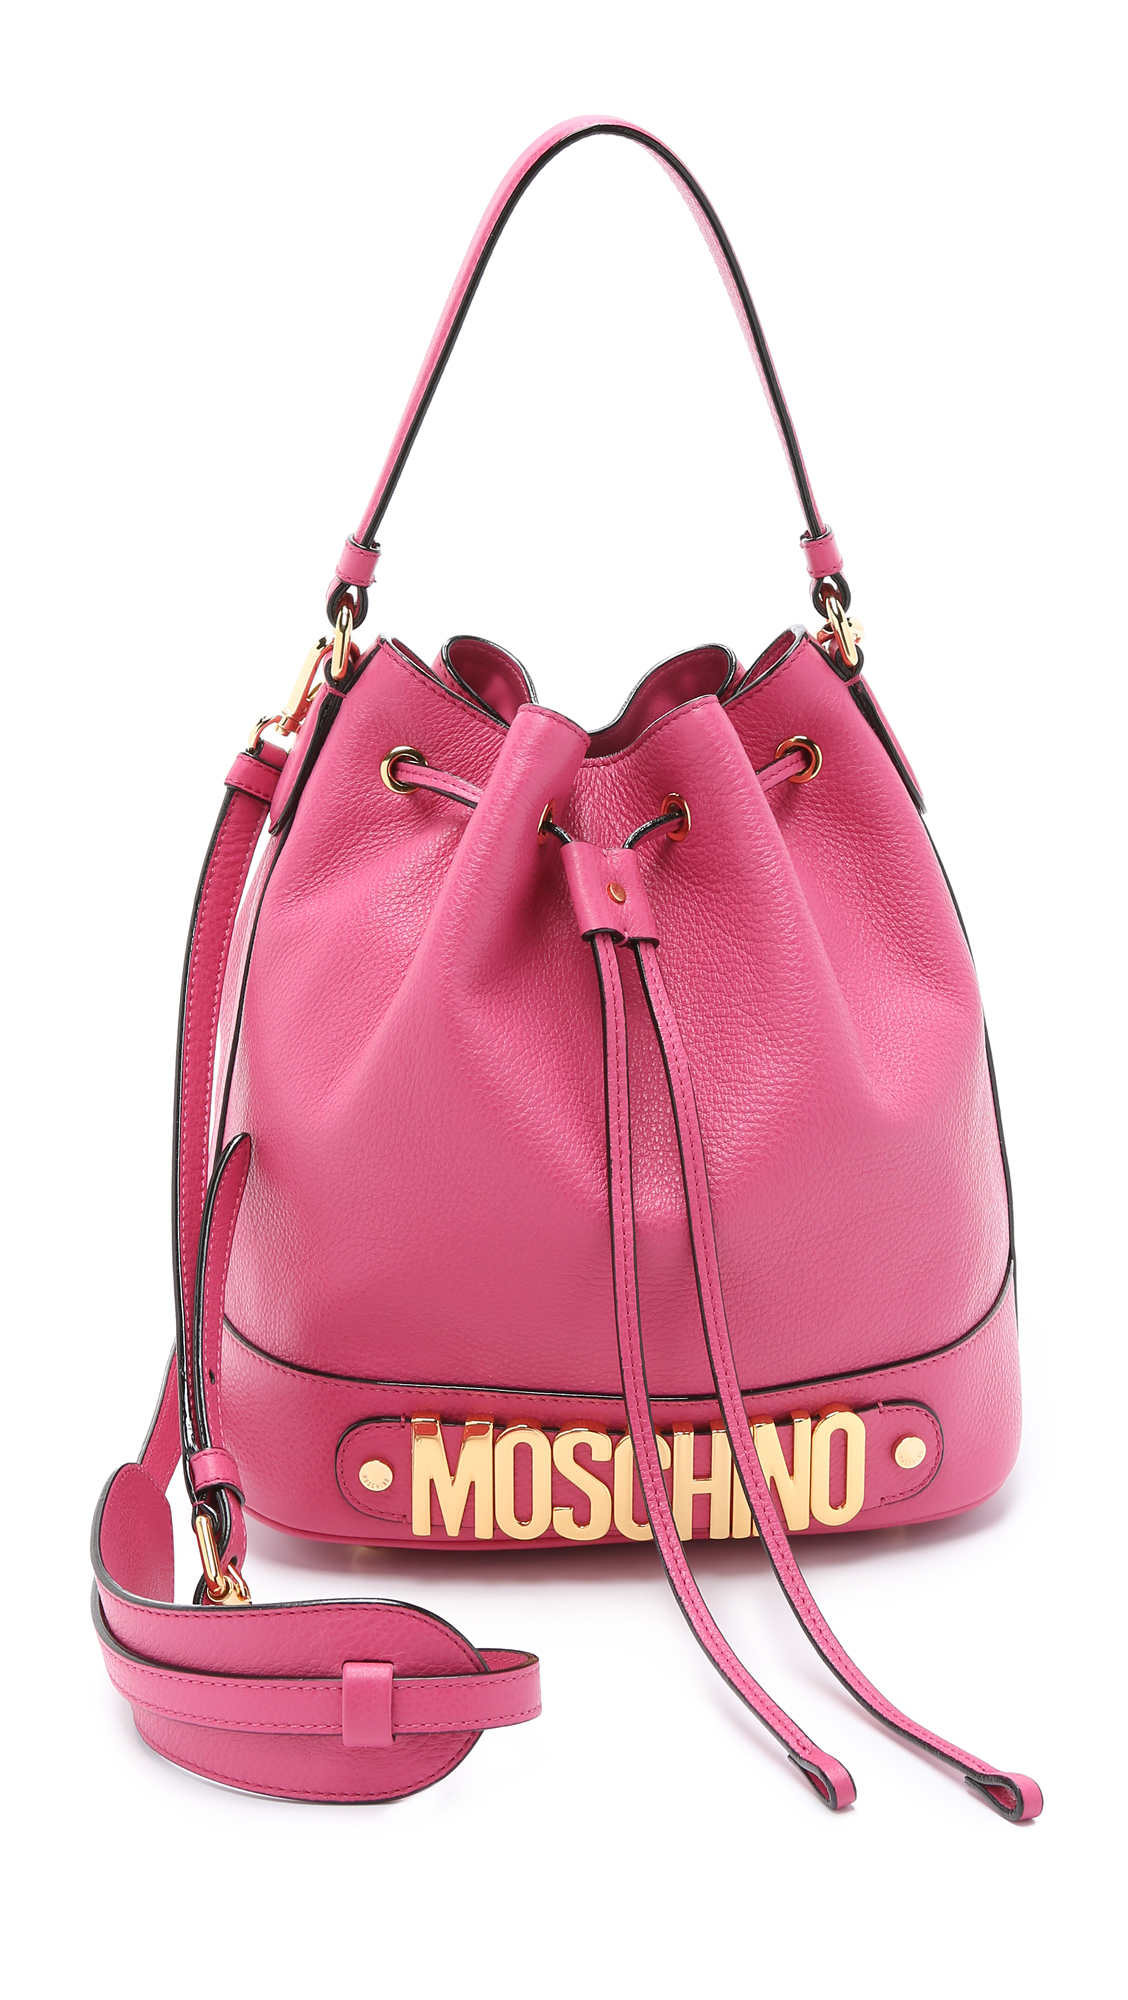 moschino-pink-leather-bucket-bag-pink-product-4-260397568-normal.jpeg